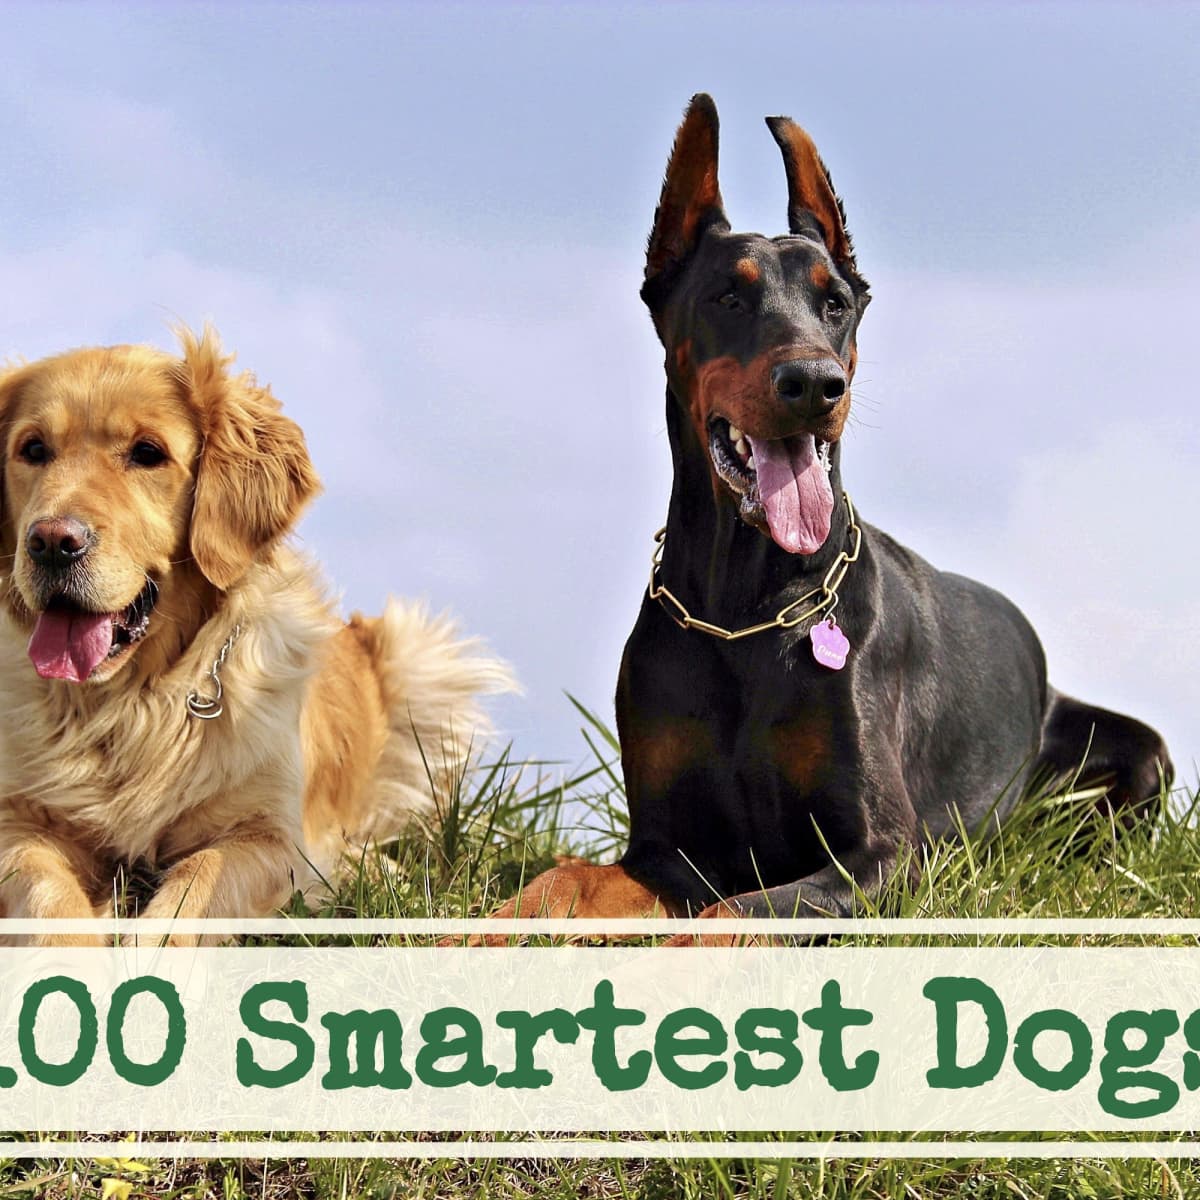 discover the top 20 cute dog breeds around the world